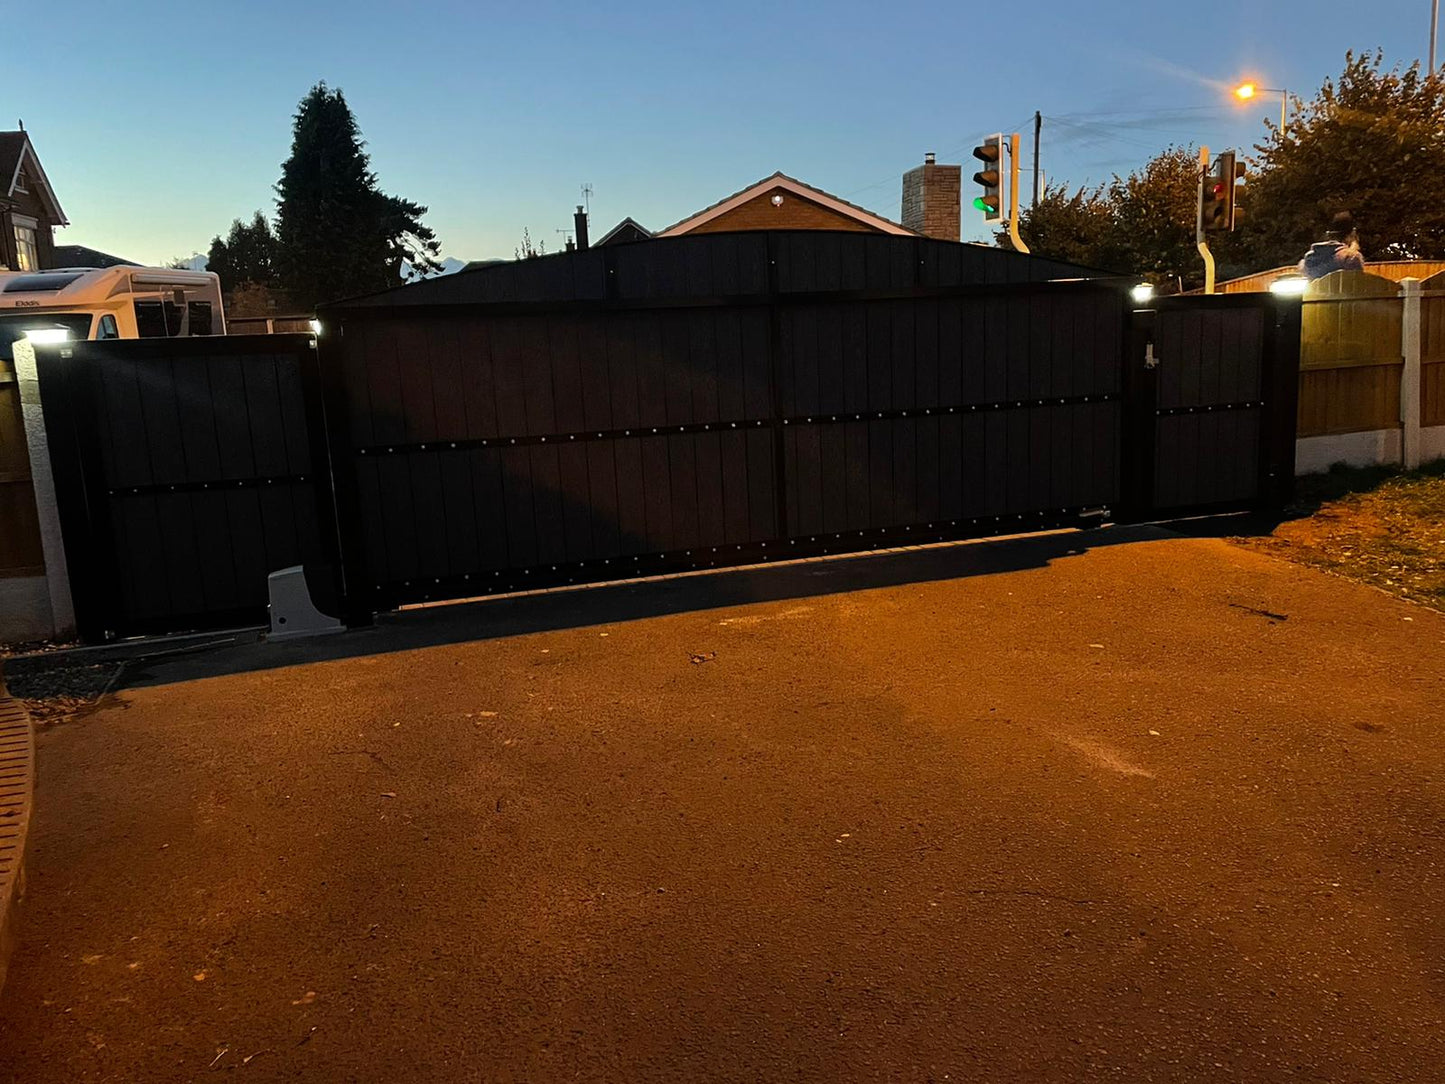 Electric Gates - Security Gate Installation For Driveway - Aluminium Sliding Gate - Front Garden Automated Sliding Gates Installation with Pedestrian Gate